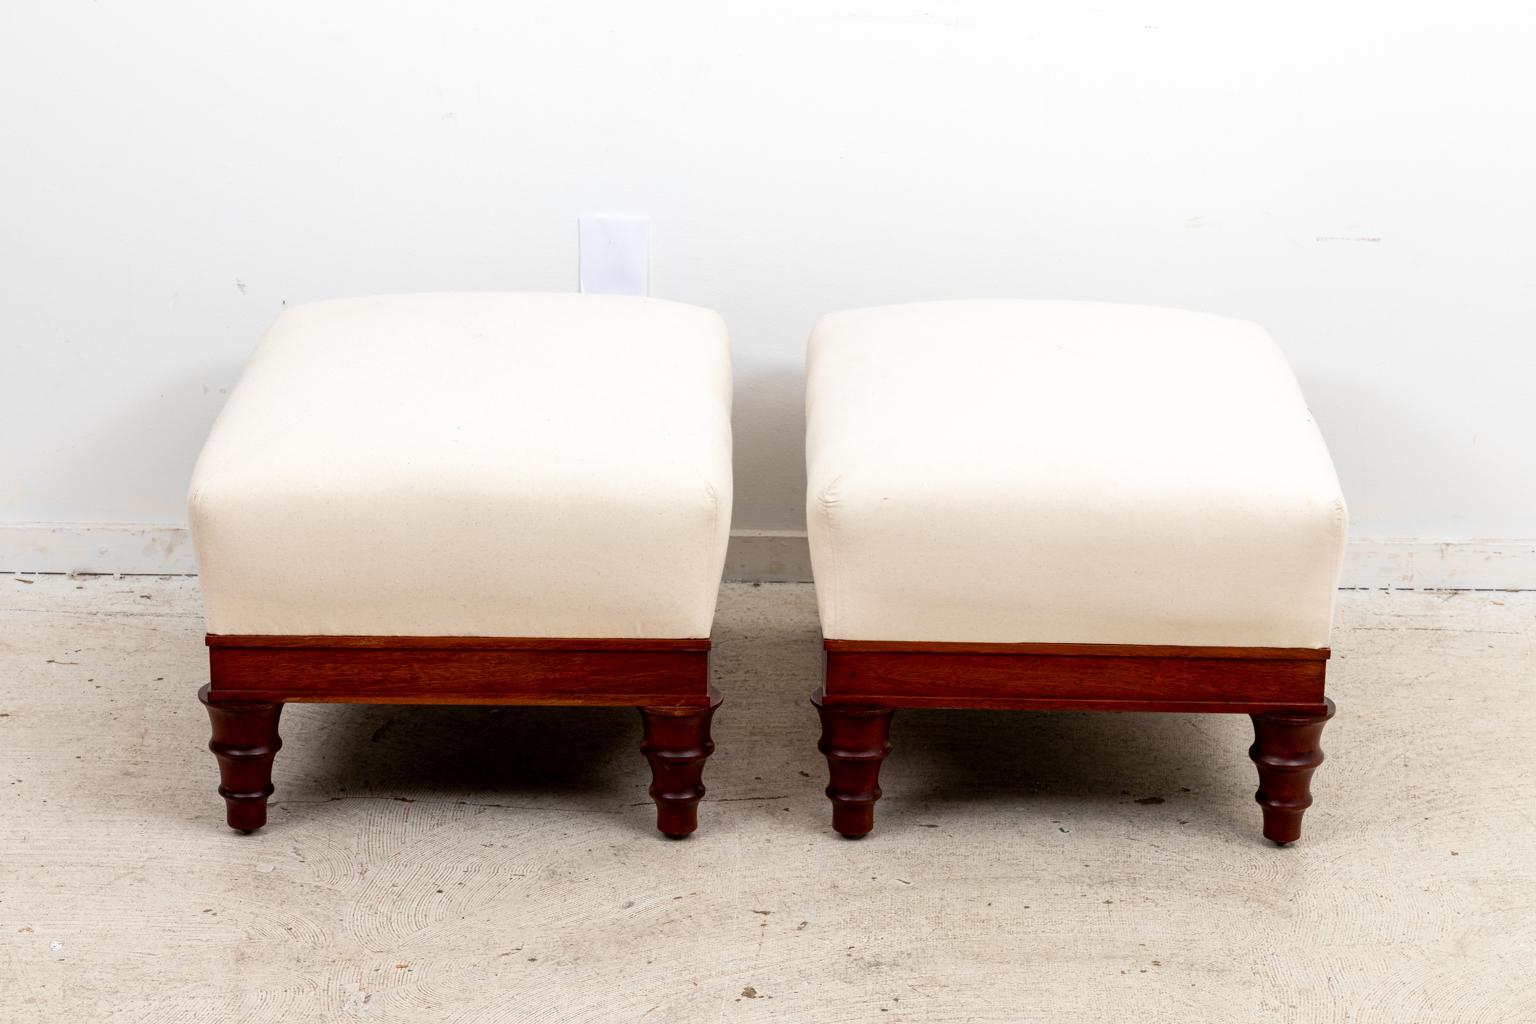 Pair of newly upholstered English style ottomans with tapered, ring turned legs. Please note of wear consistent with age including minor finish loss to the wood.